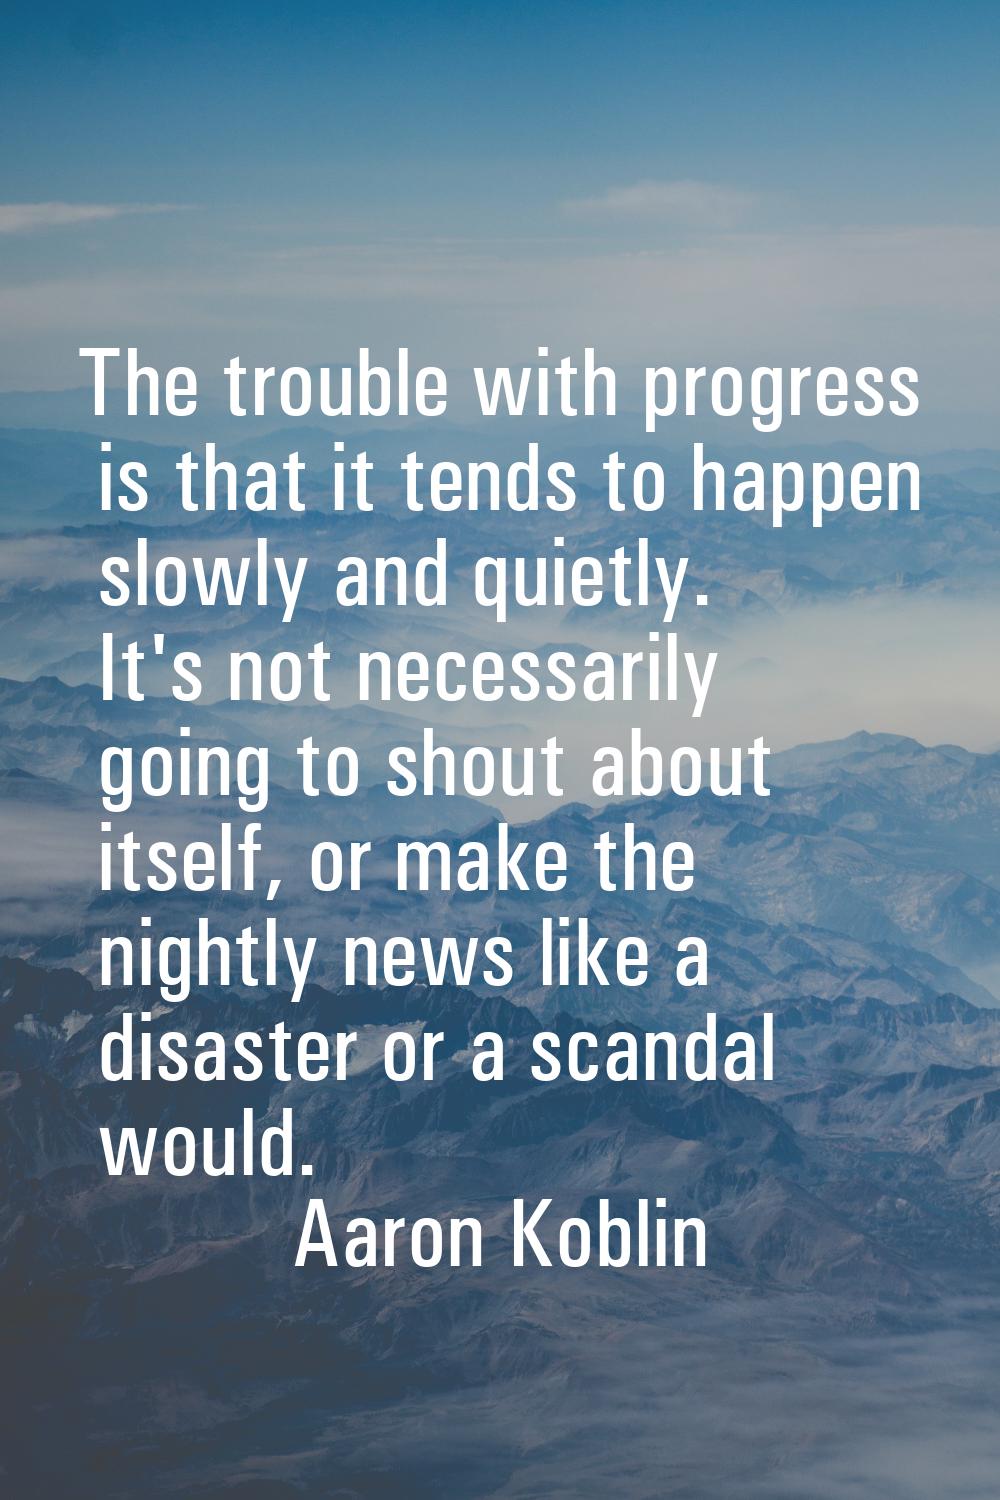 The trouble with progress is that it tends to happen slowly and quietly. It's not necessarily going